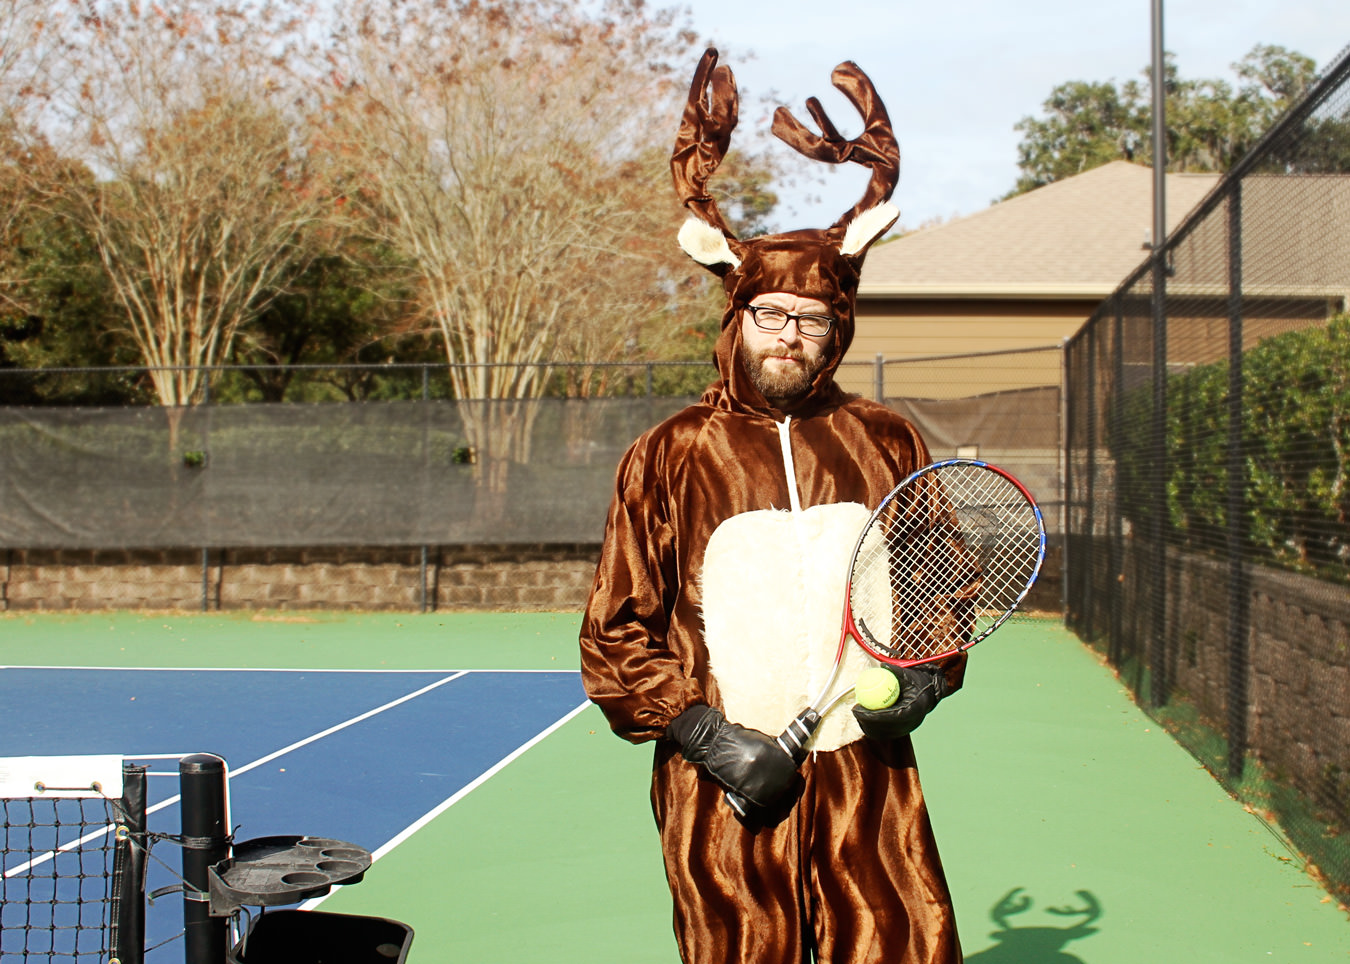 An outtake from the 2012 Holiday Card photo shoot where I get my Andre Agassi on.